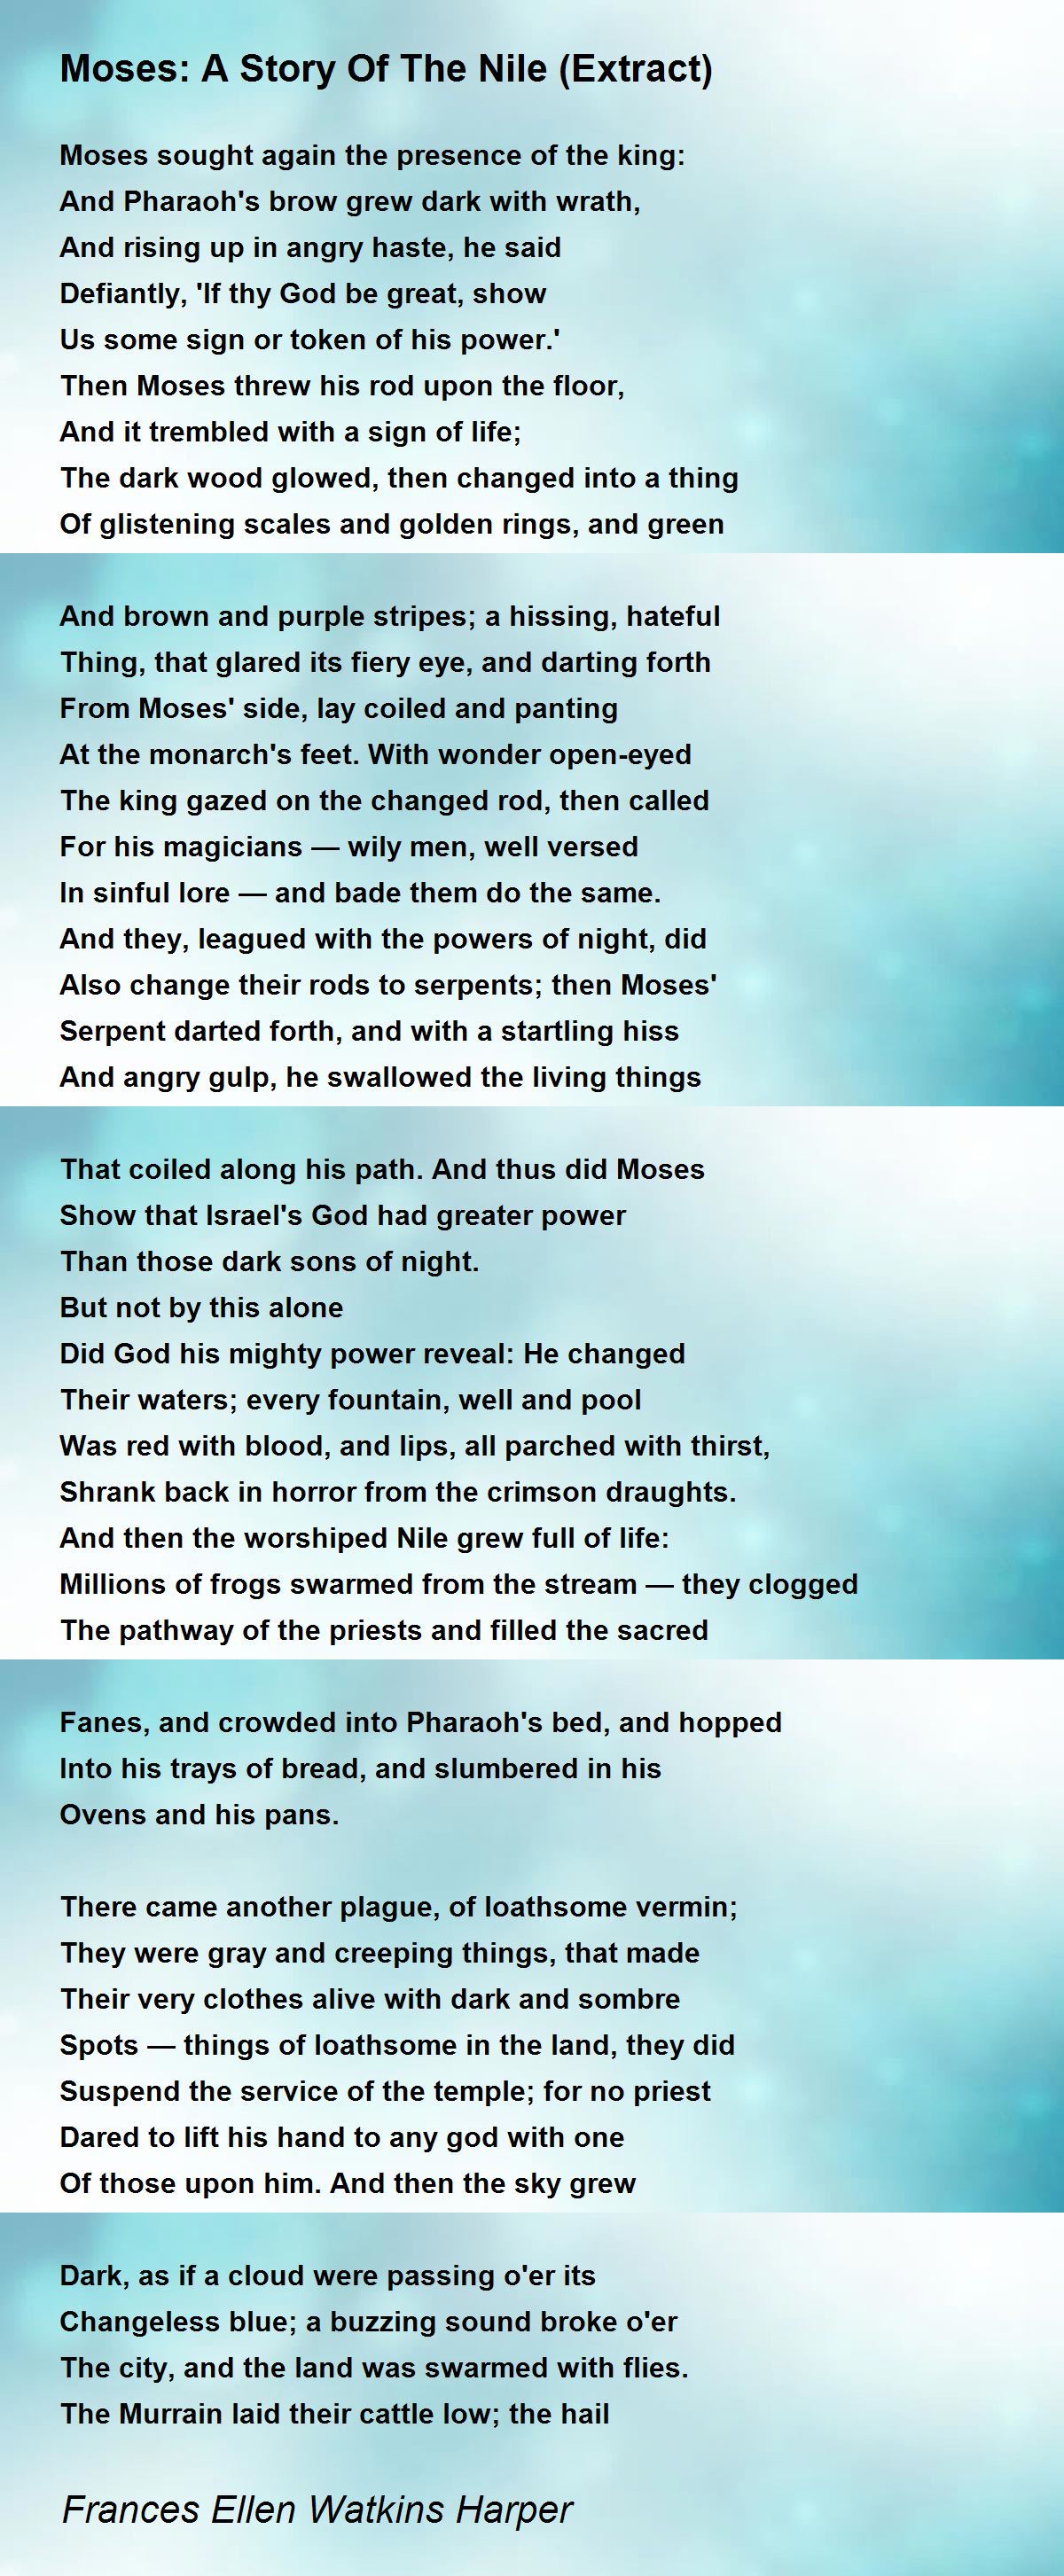 Moses: A Story Of The Nile (Extract) Poem by Frances Ellen Watkins